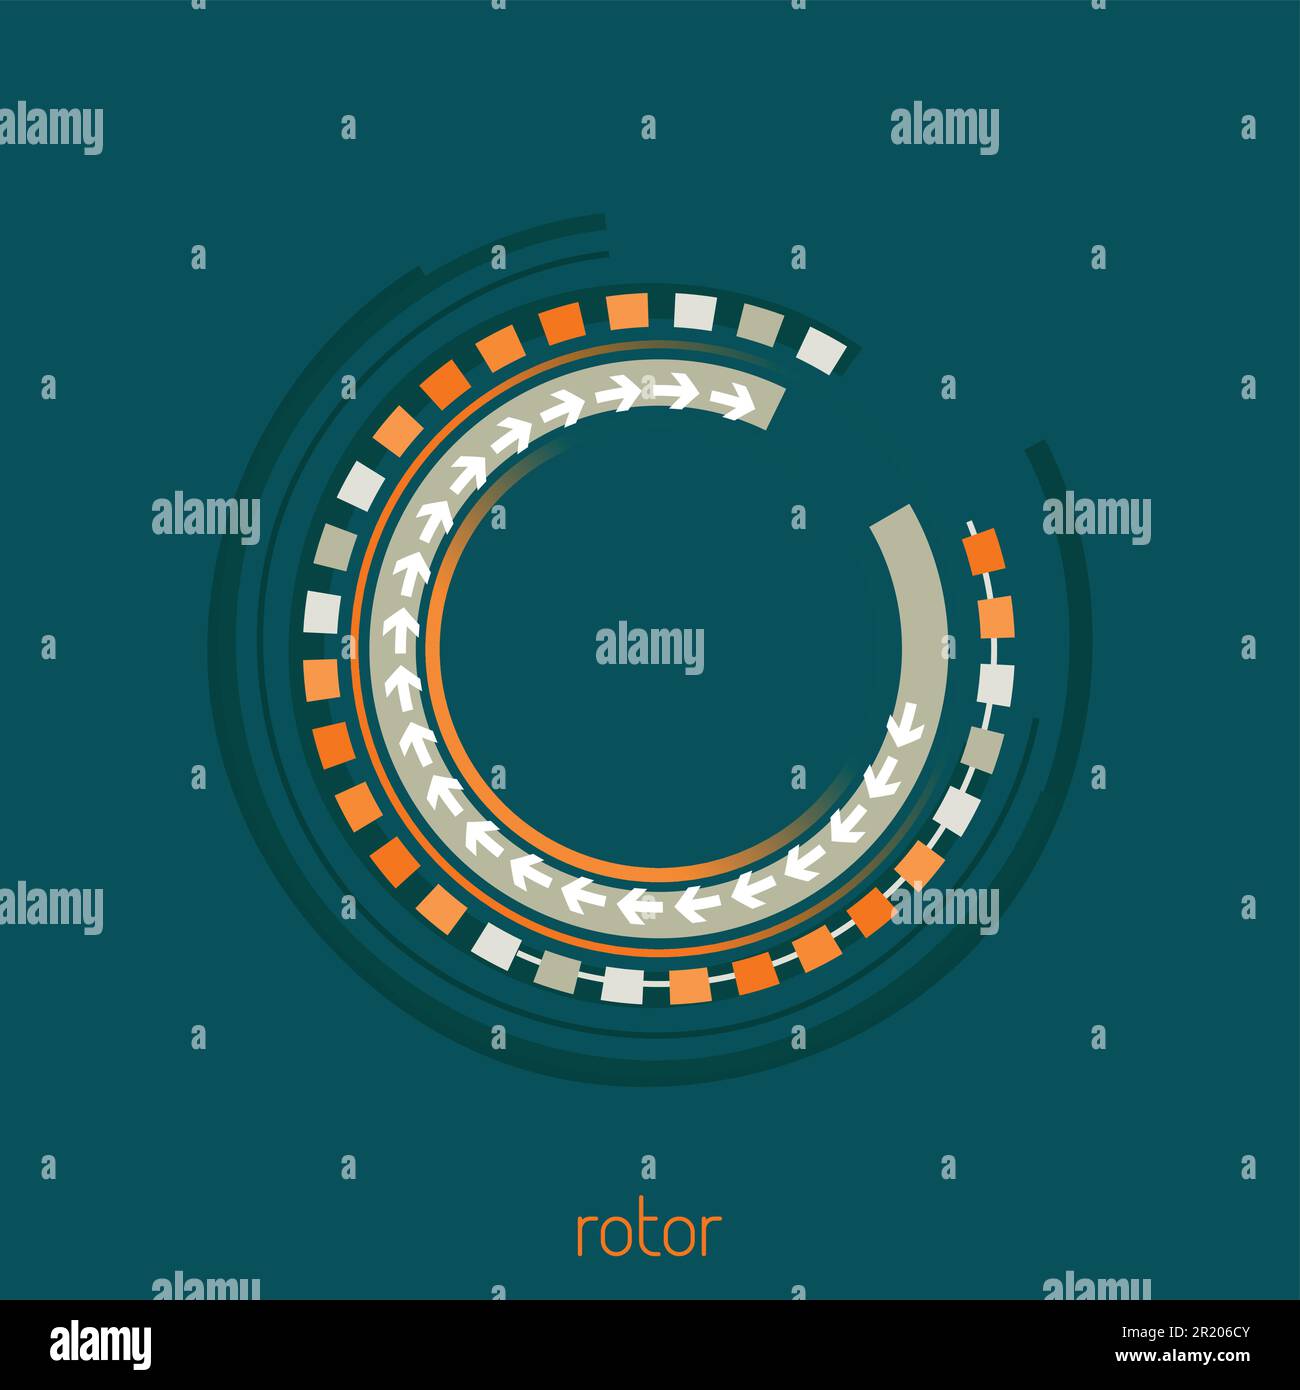 Logo template with abstract rotating wheel on a sherpa blue background. Vector Stock Vector